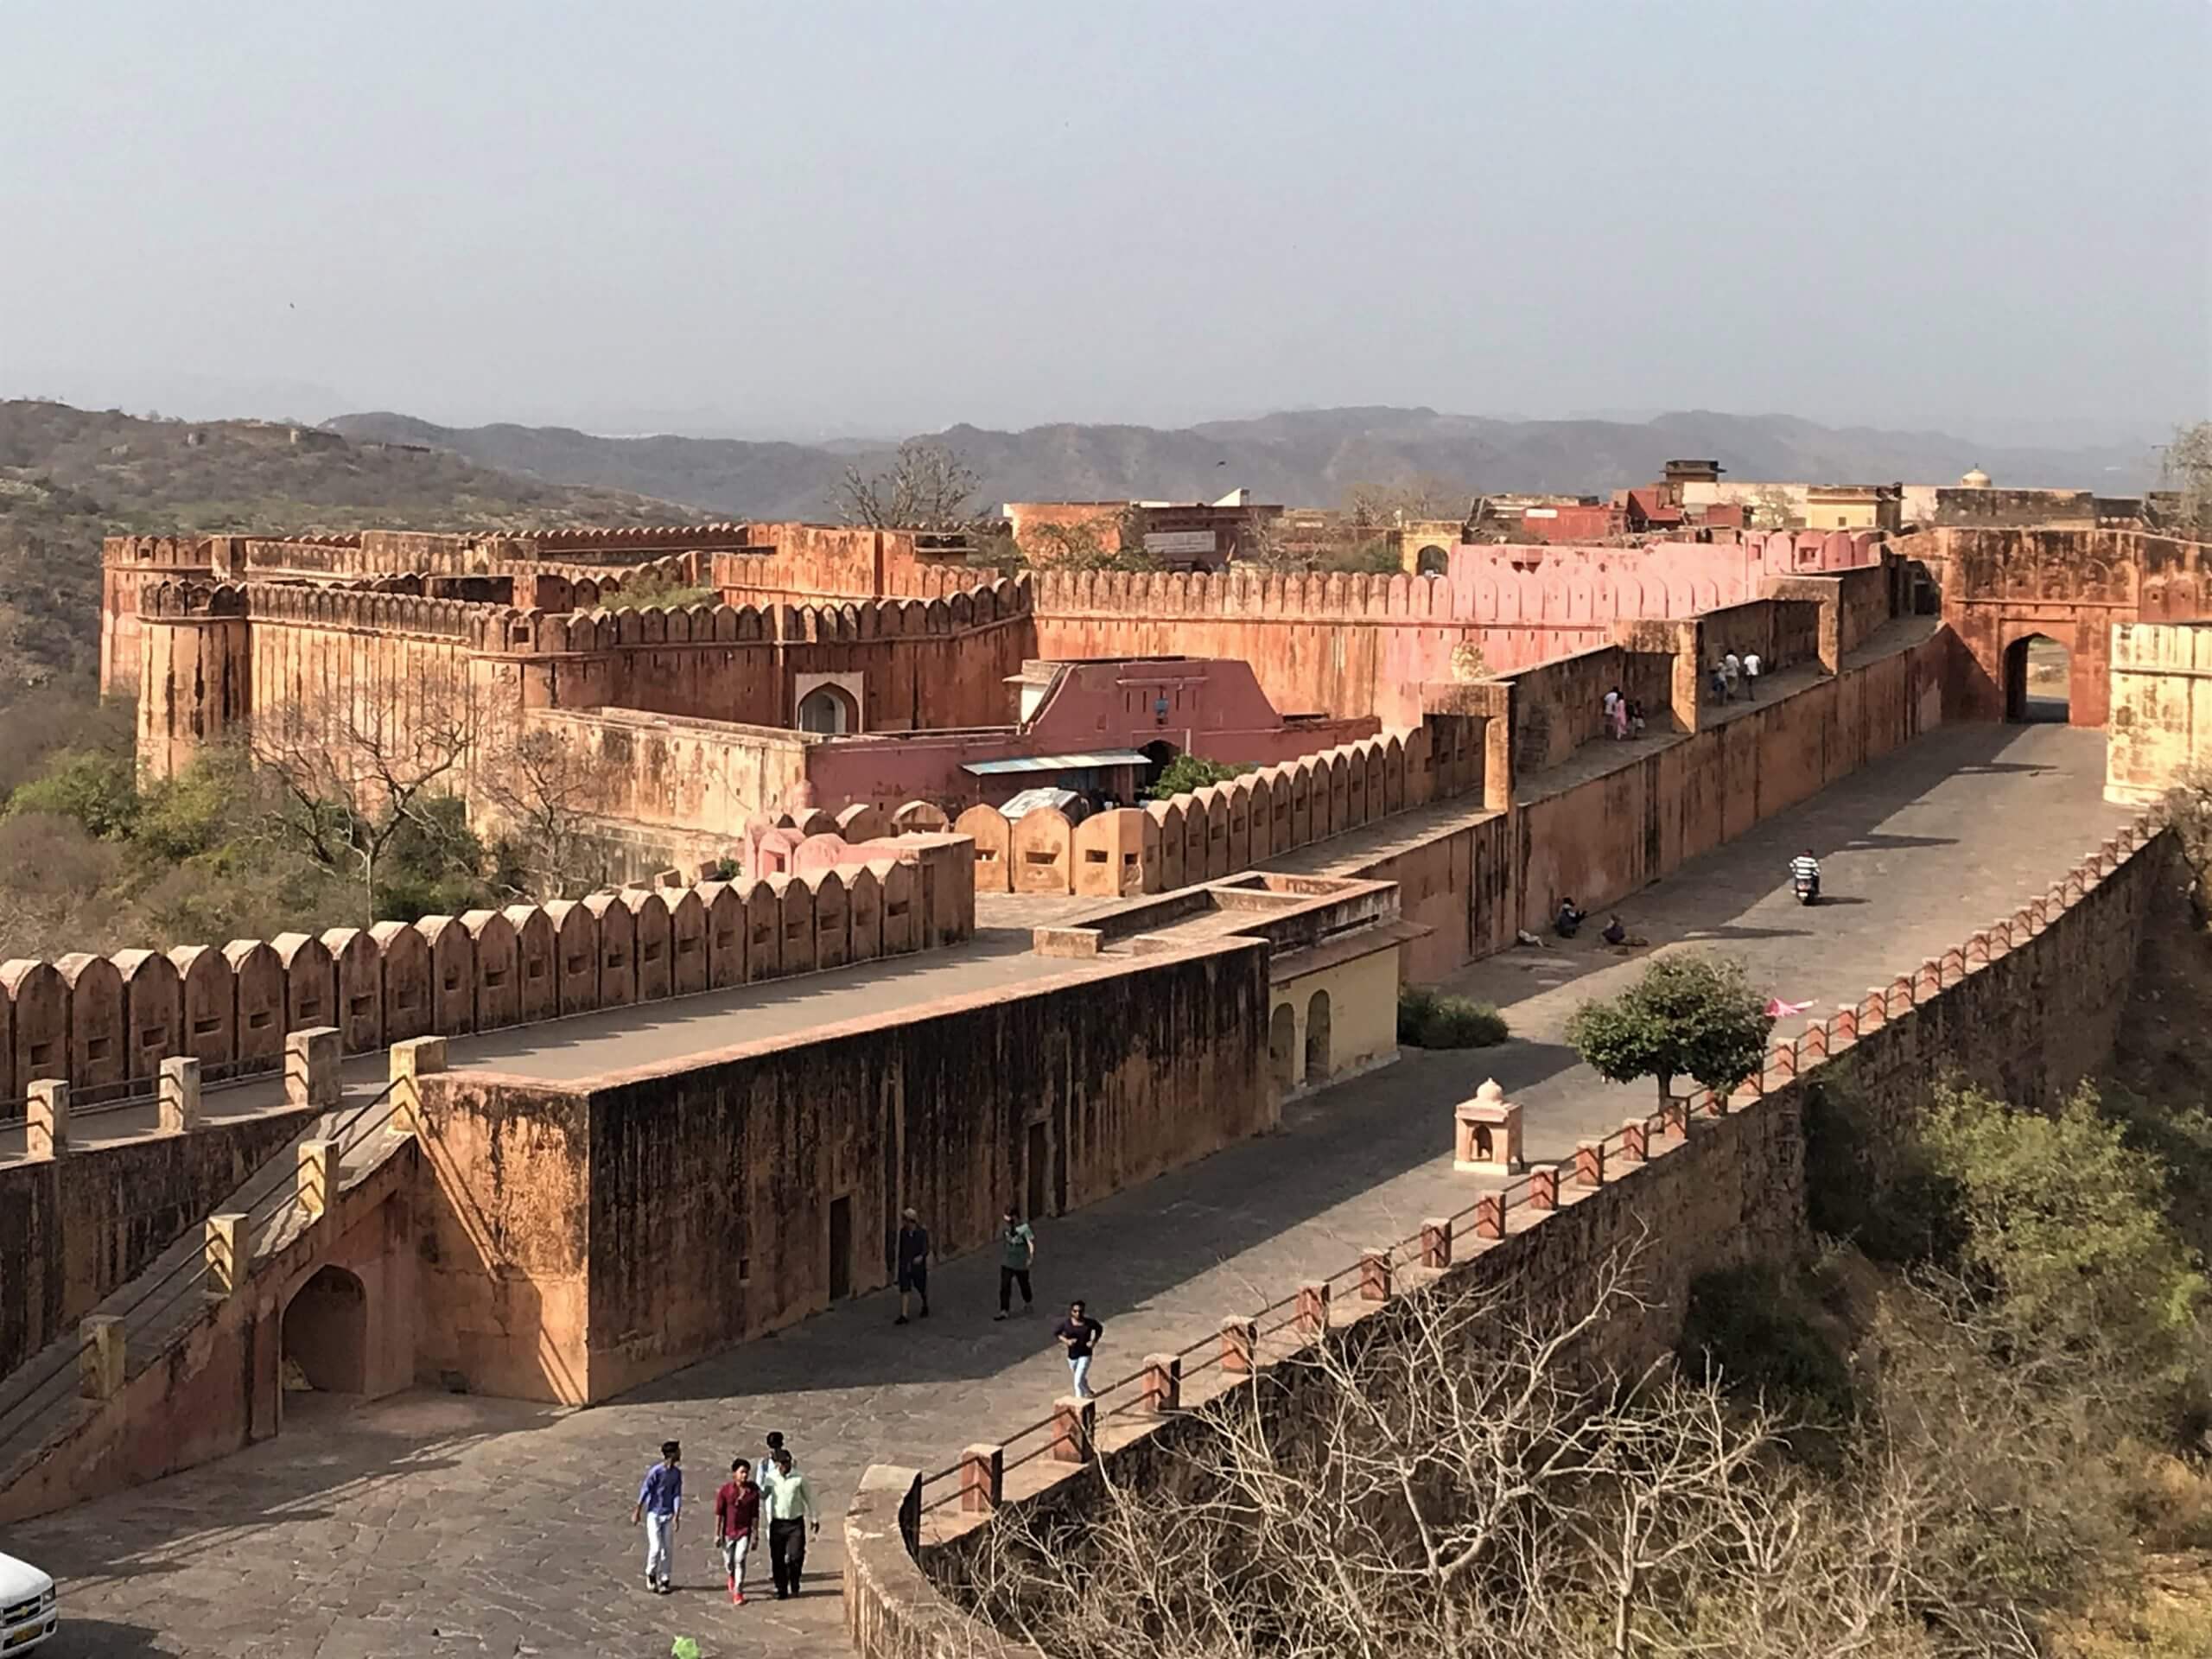 Jaigarh Fort from above